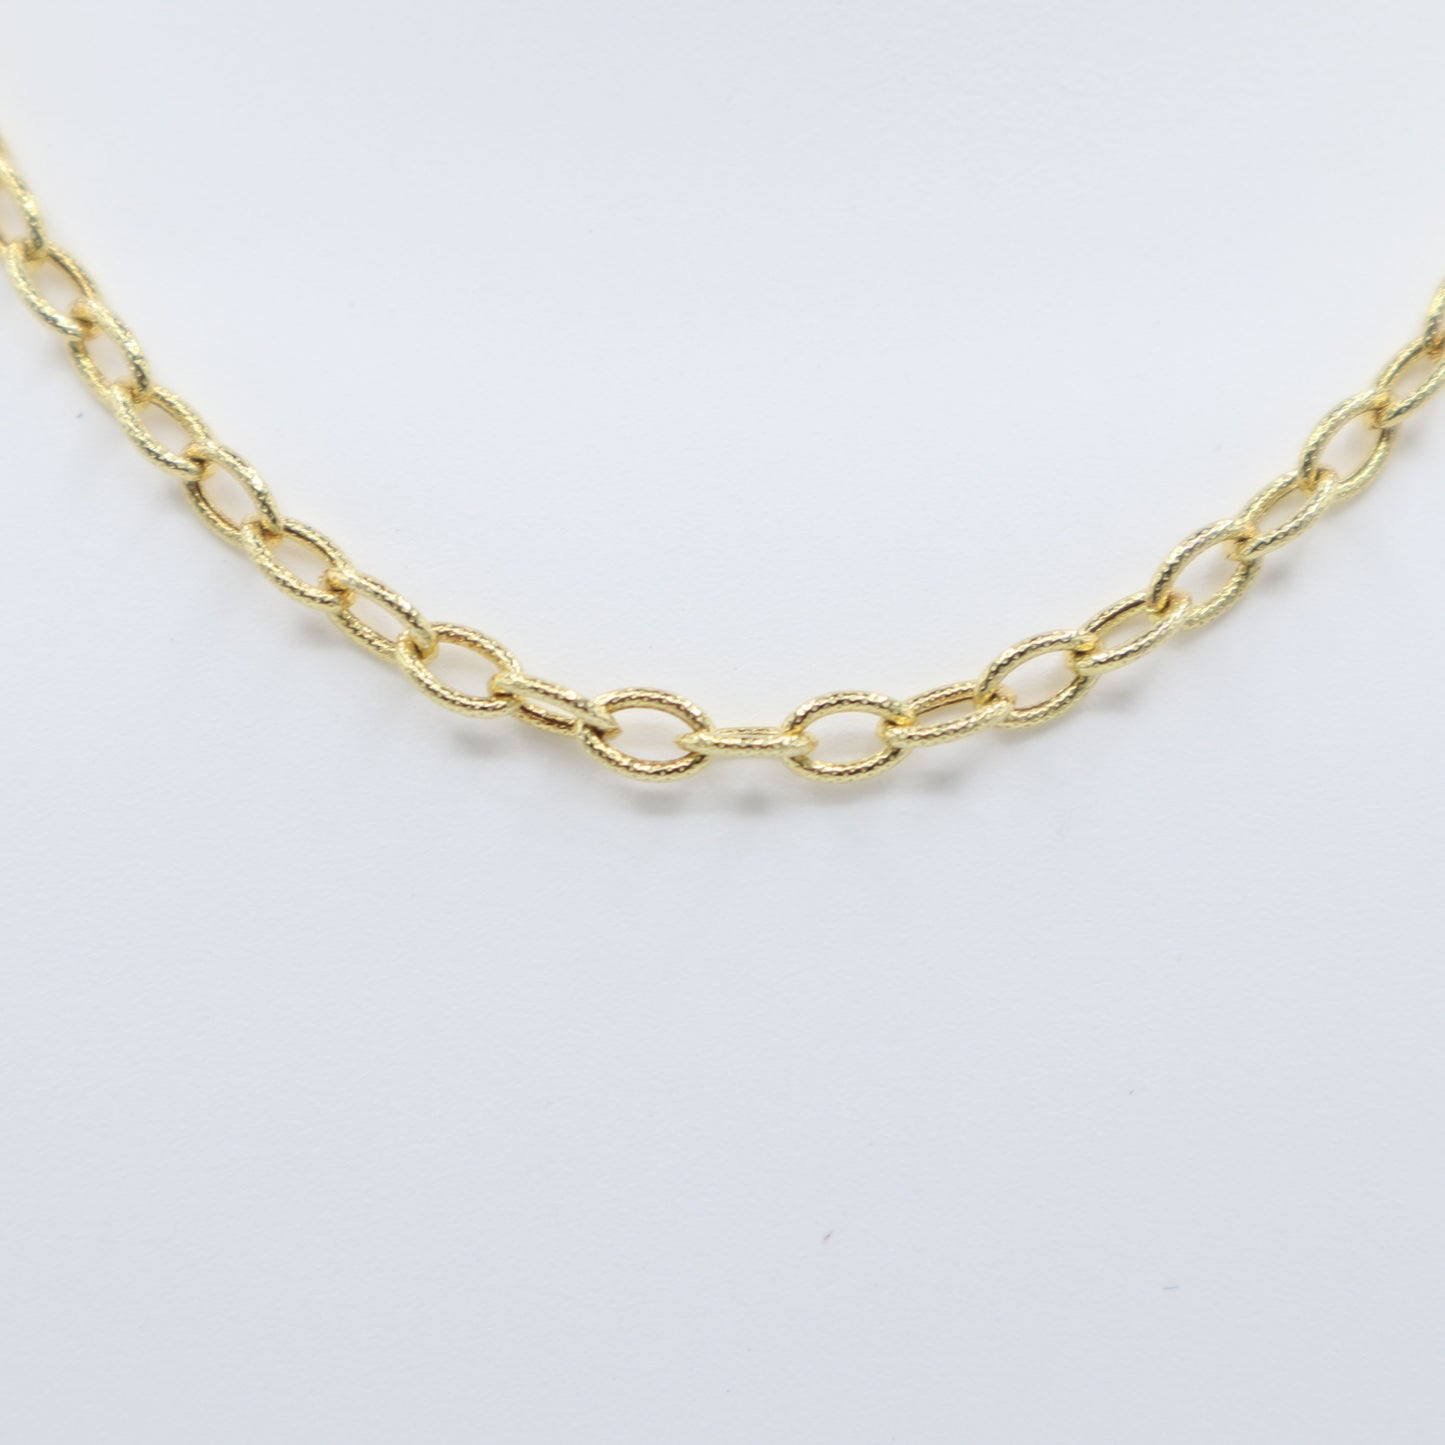 Gold Textured Cable Chain 18"